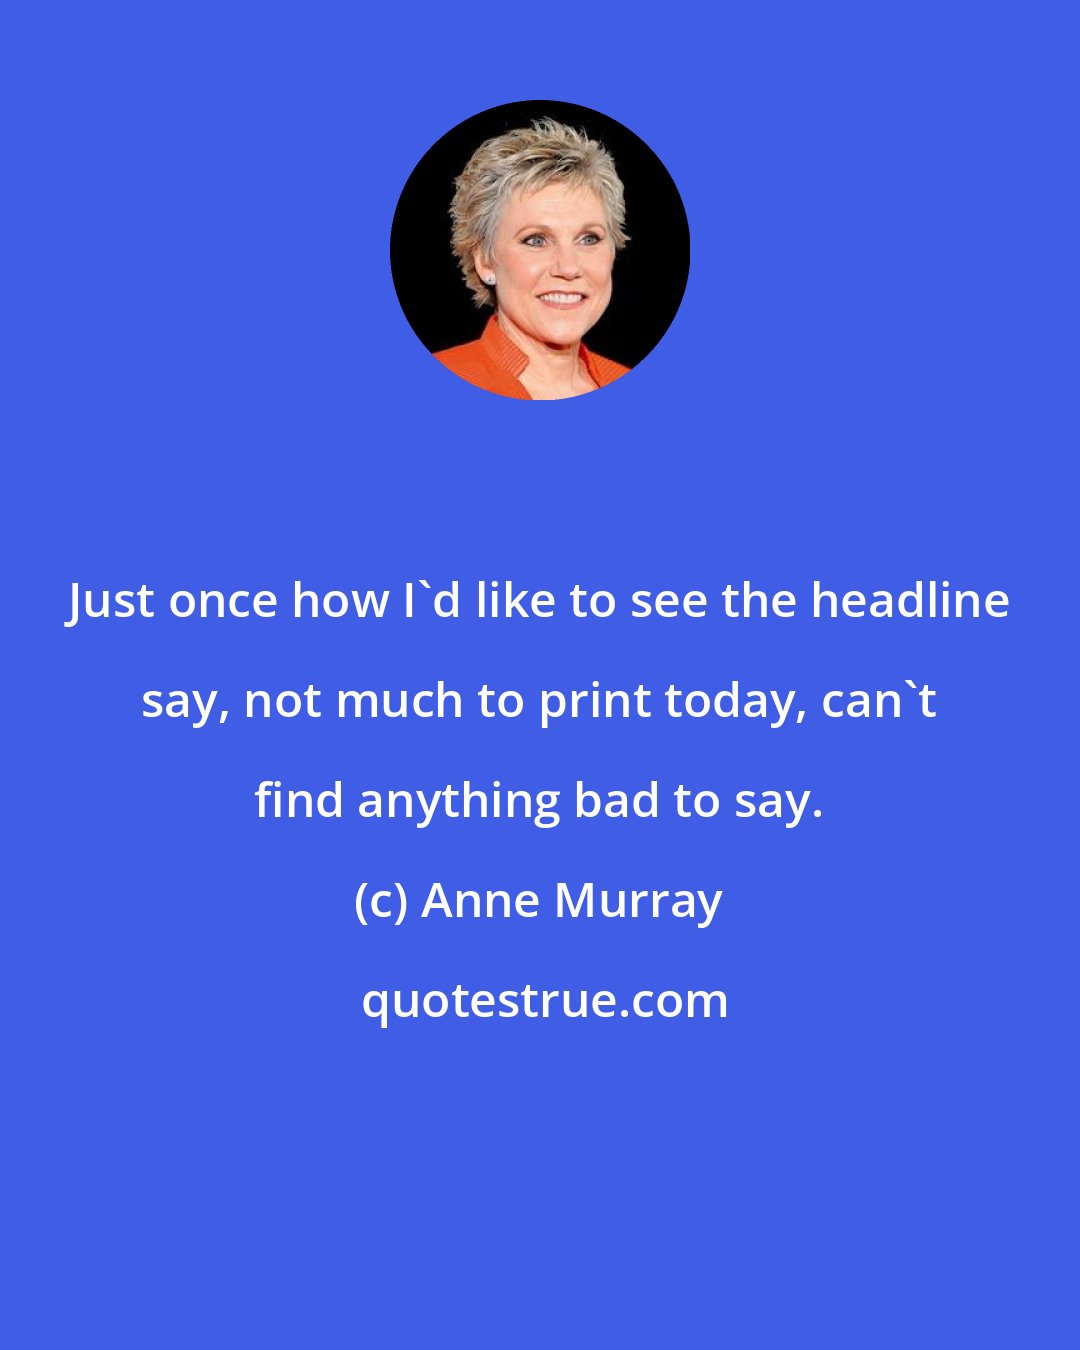 Anne Murray: Just once how I'd like to see the headline say, not much to print today, can't find anything bad to say.